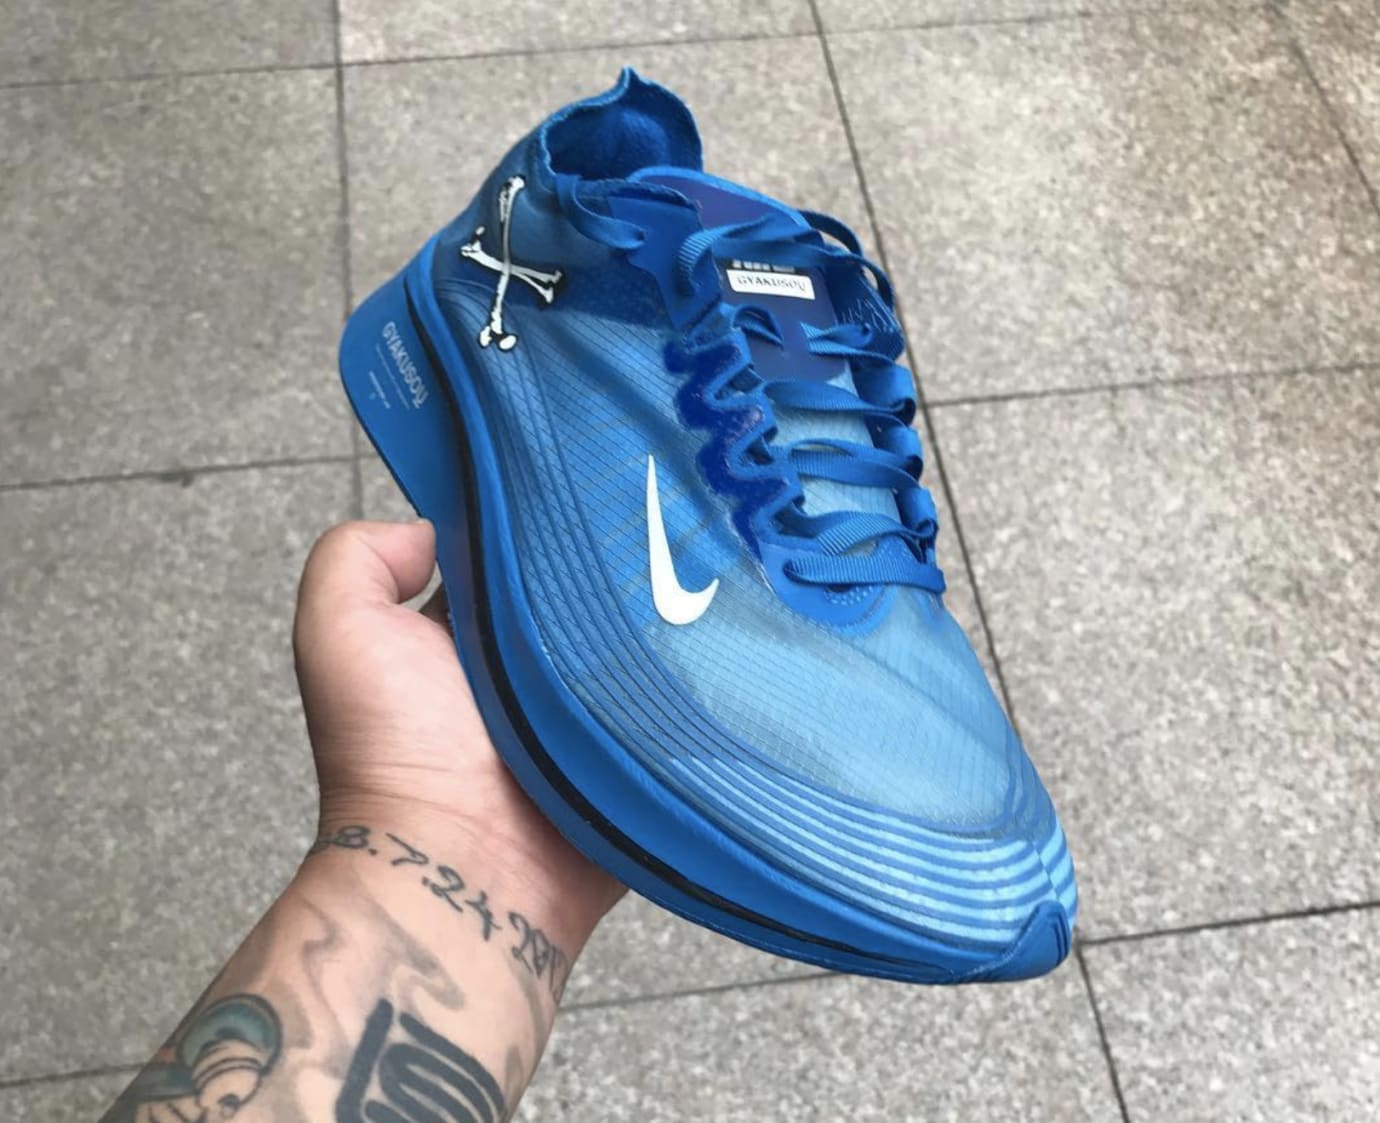 Undercover Gyakusou x Nike Zoom Fly SP Images | Sole Collector